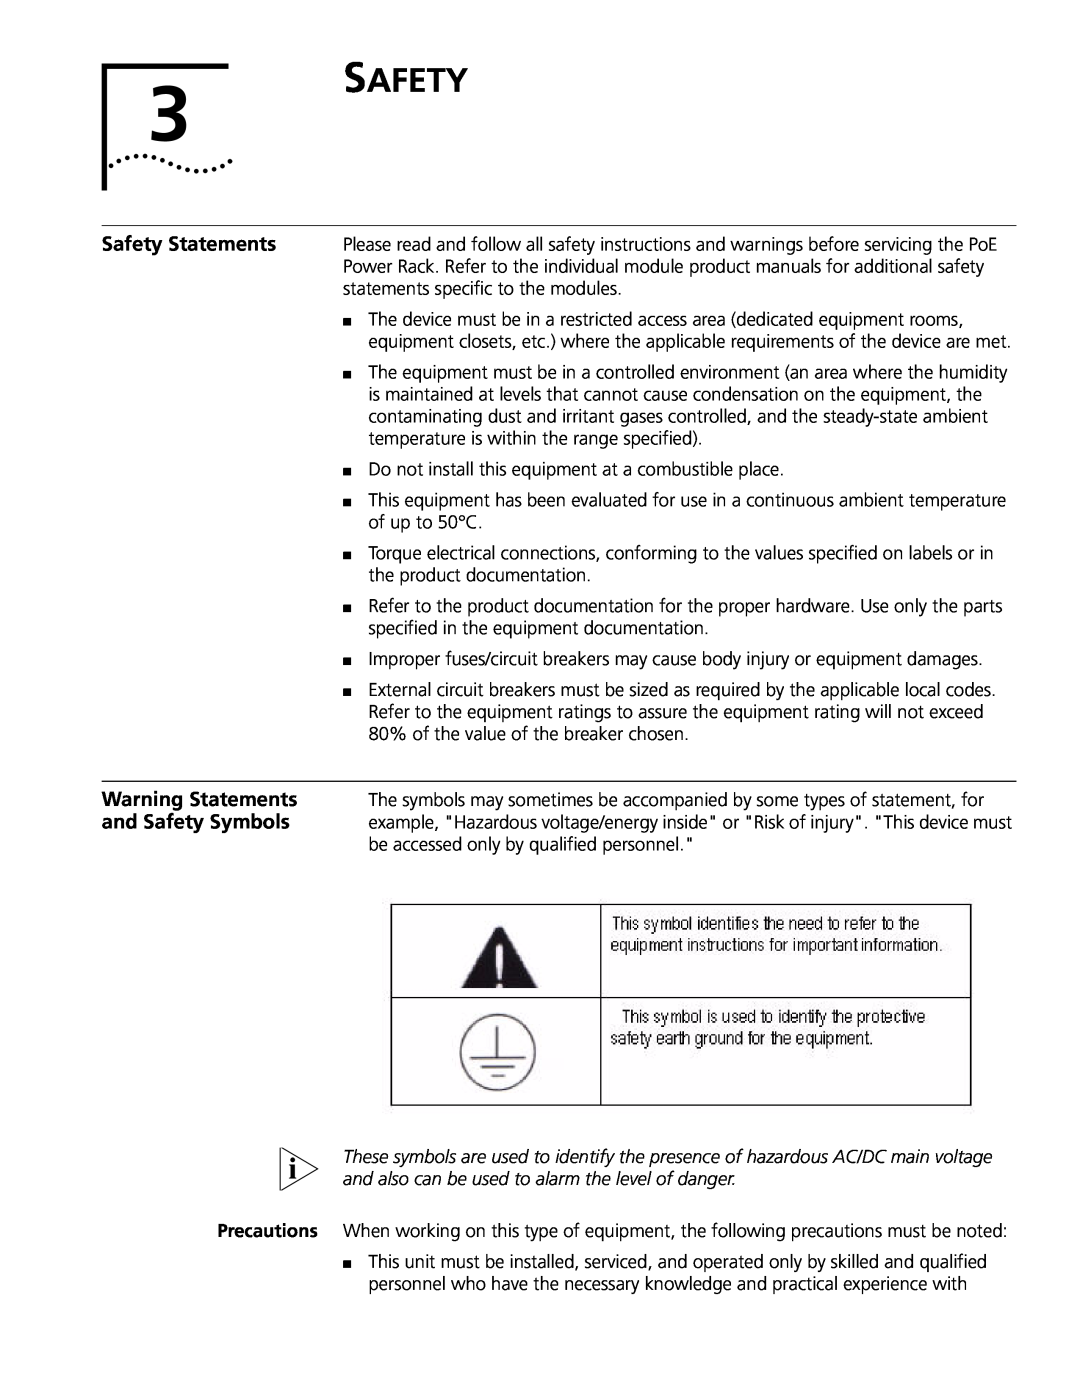 3Com 8800 manual Safety Statements, Warning Statements, and Safety Symbols 